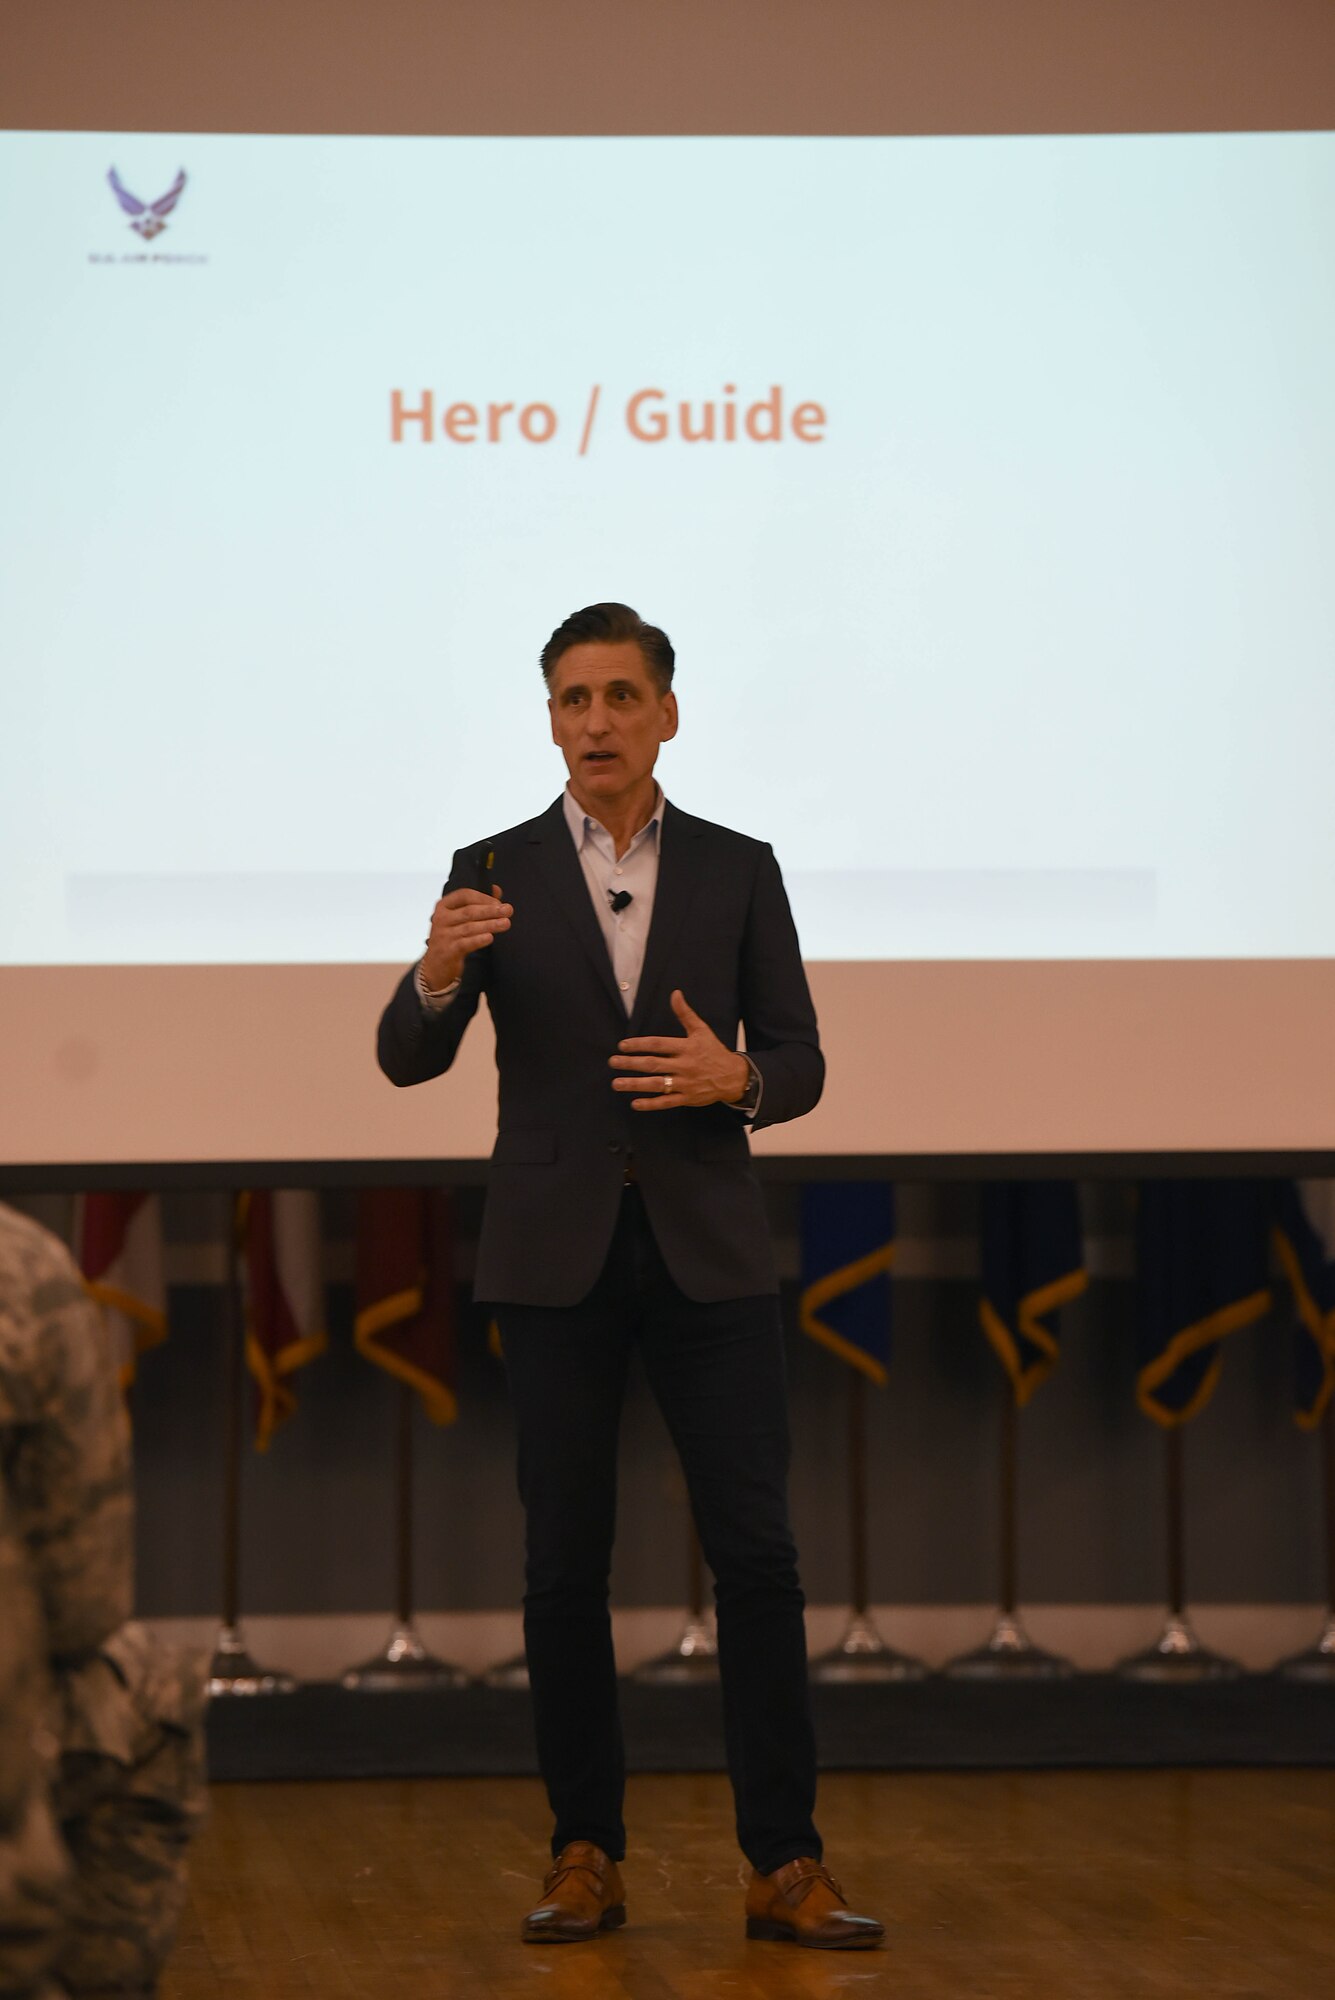 Andy Christiansen, motivational speaker, presents his idea on mentorship to 14th Flying Training Wing Airmen, Sept. 14, 2018, on Columbus Air Force Base, Mississippi. Christiansen has worked as an honorary professor at the Air University’s Air Command and Staff College at Maxwell Air Force Base, Alabama, for numerous years and is a motivational speaker and innovator of leadership practices. (U.S. Air Force photo by Airman 1st Class Keith Holcomb)